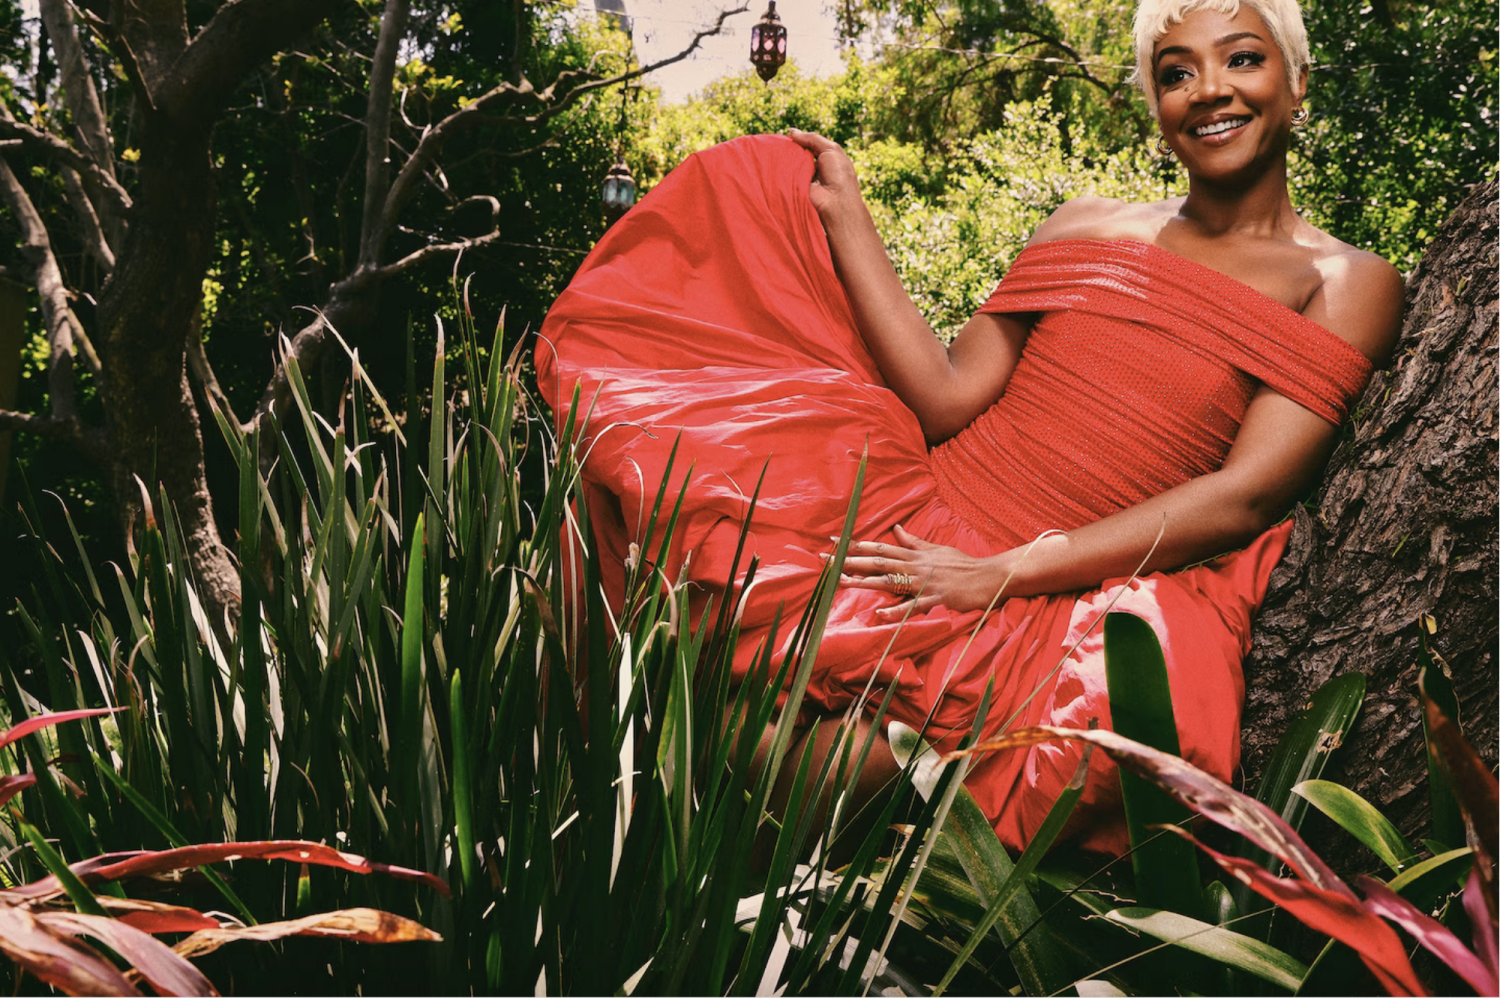 Haddish says of her frenetic schedule that “it would be a disservice to my soul not to ... do things that make me happy.” (Chrisean Rose for The Washington Post)